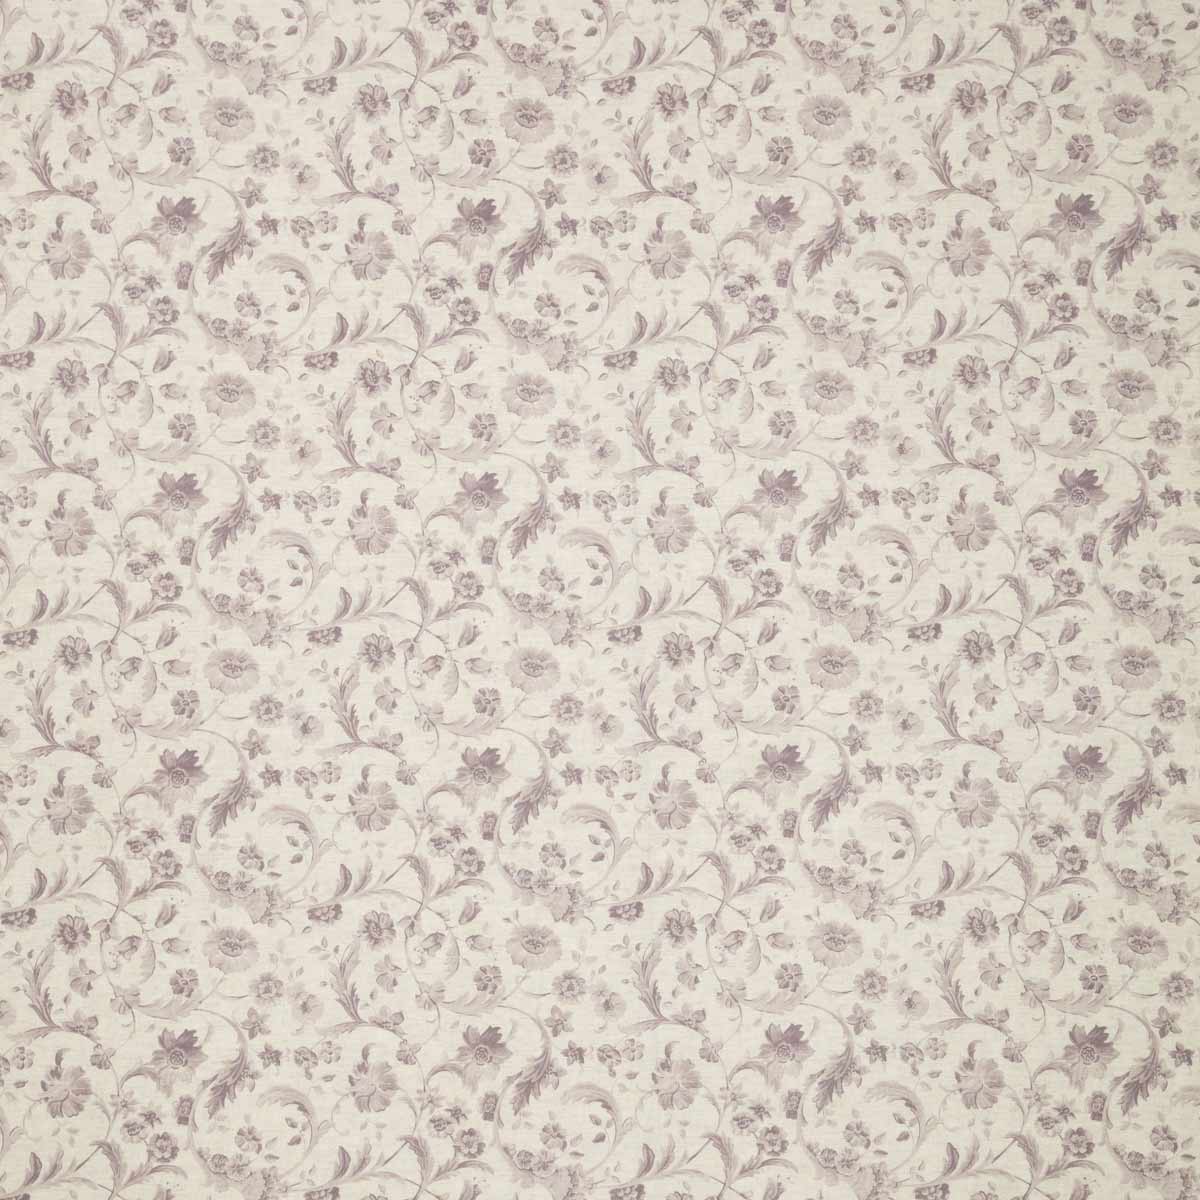 Tuileries Curtain Fabric Mulberry